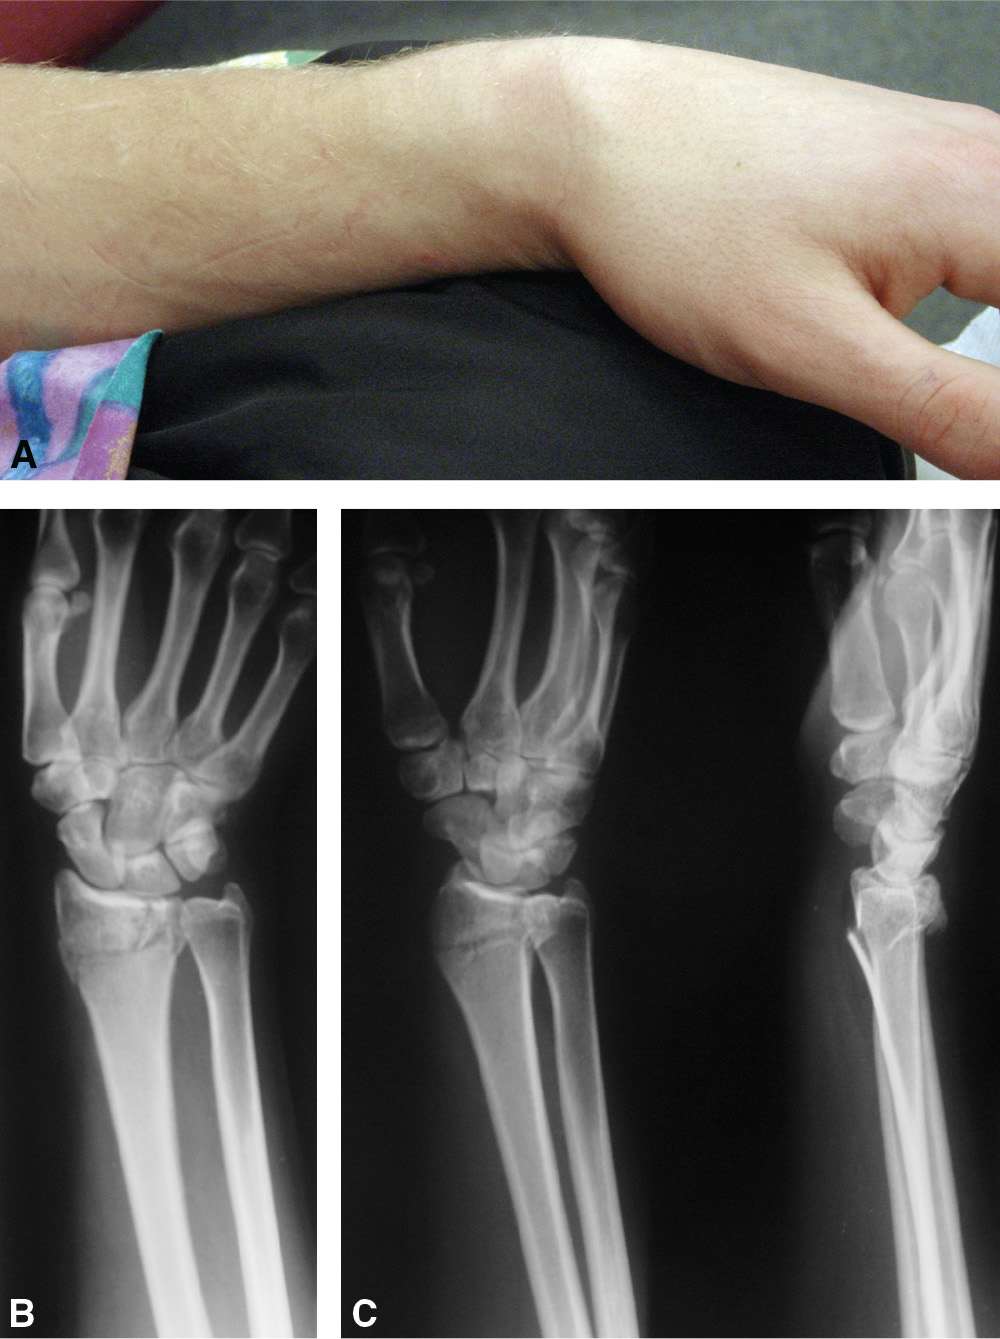 colles fracture vs smith fracture x ray